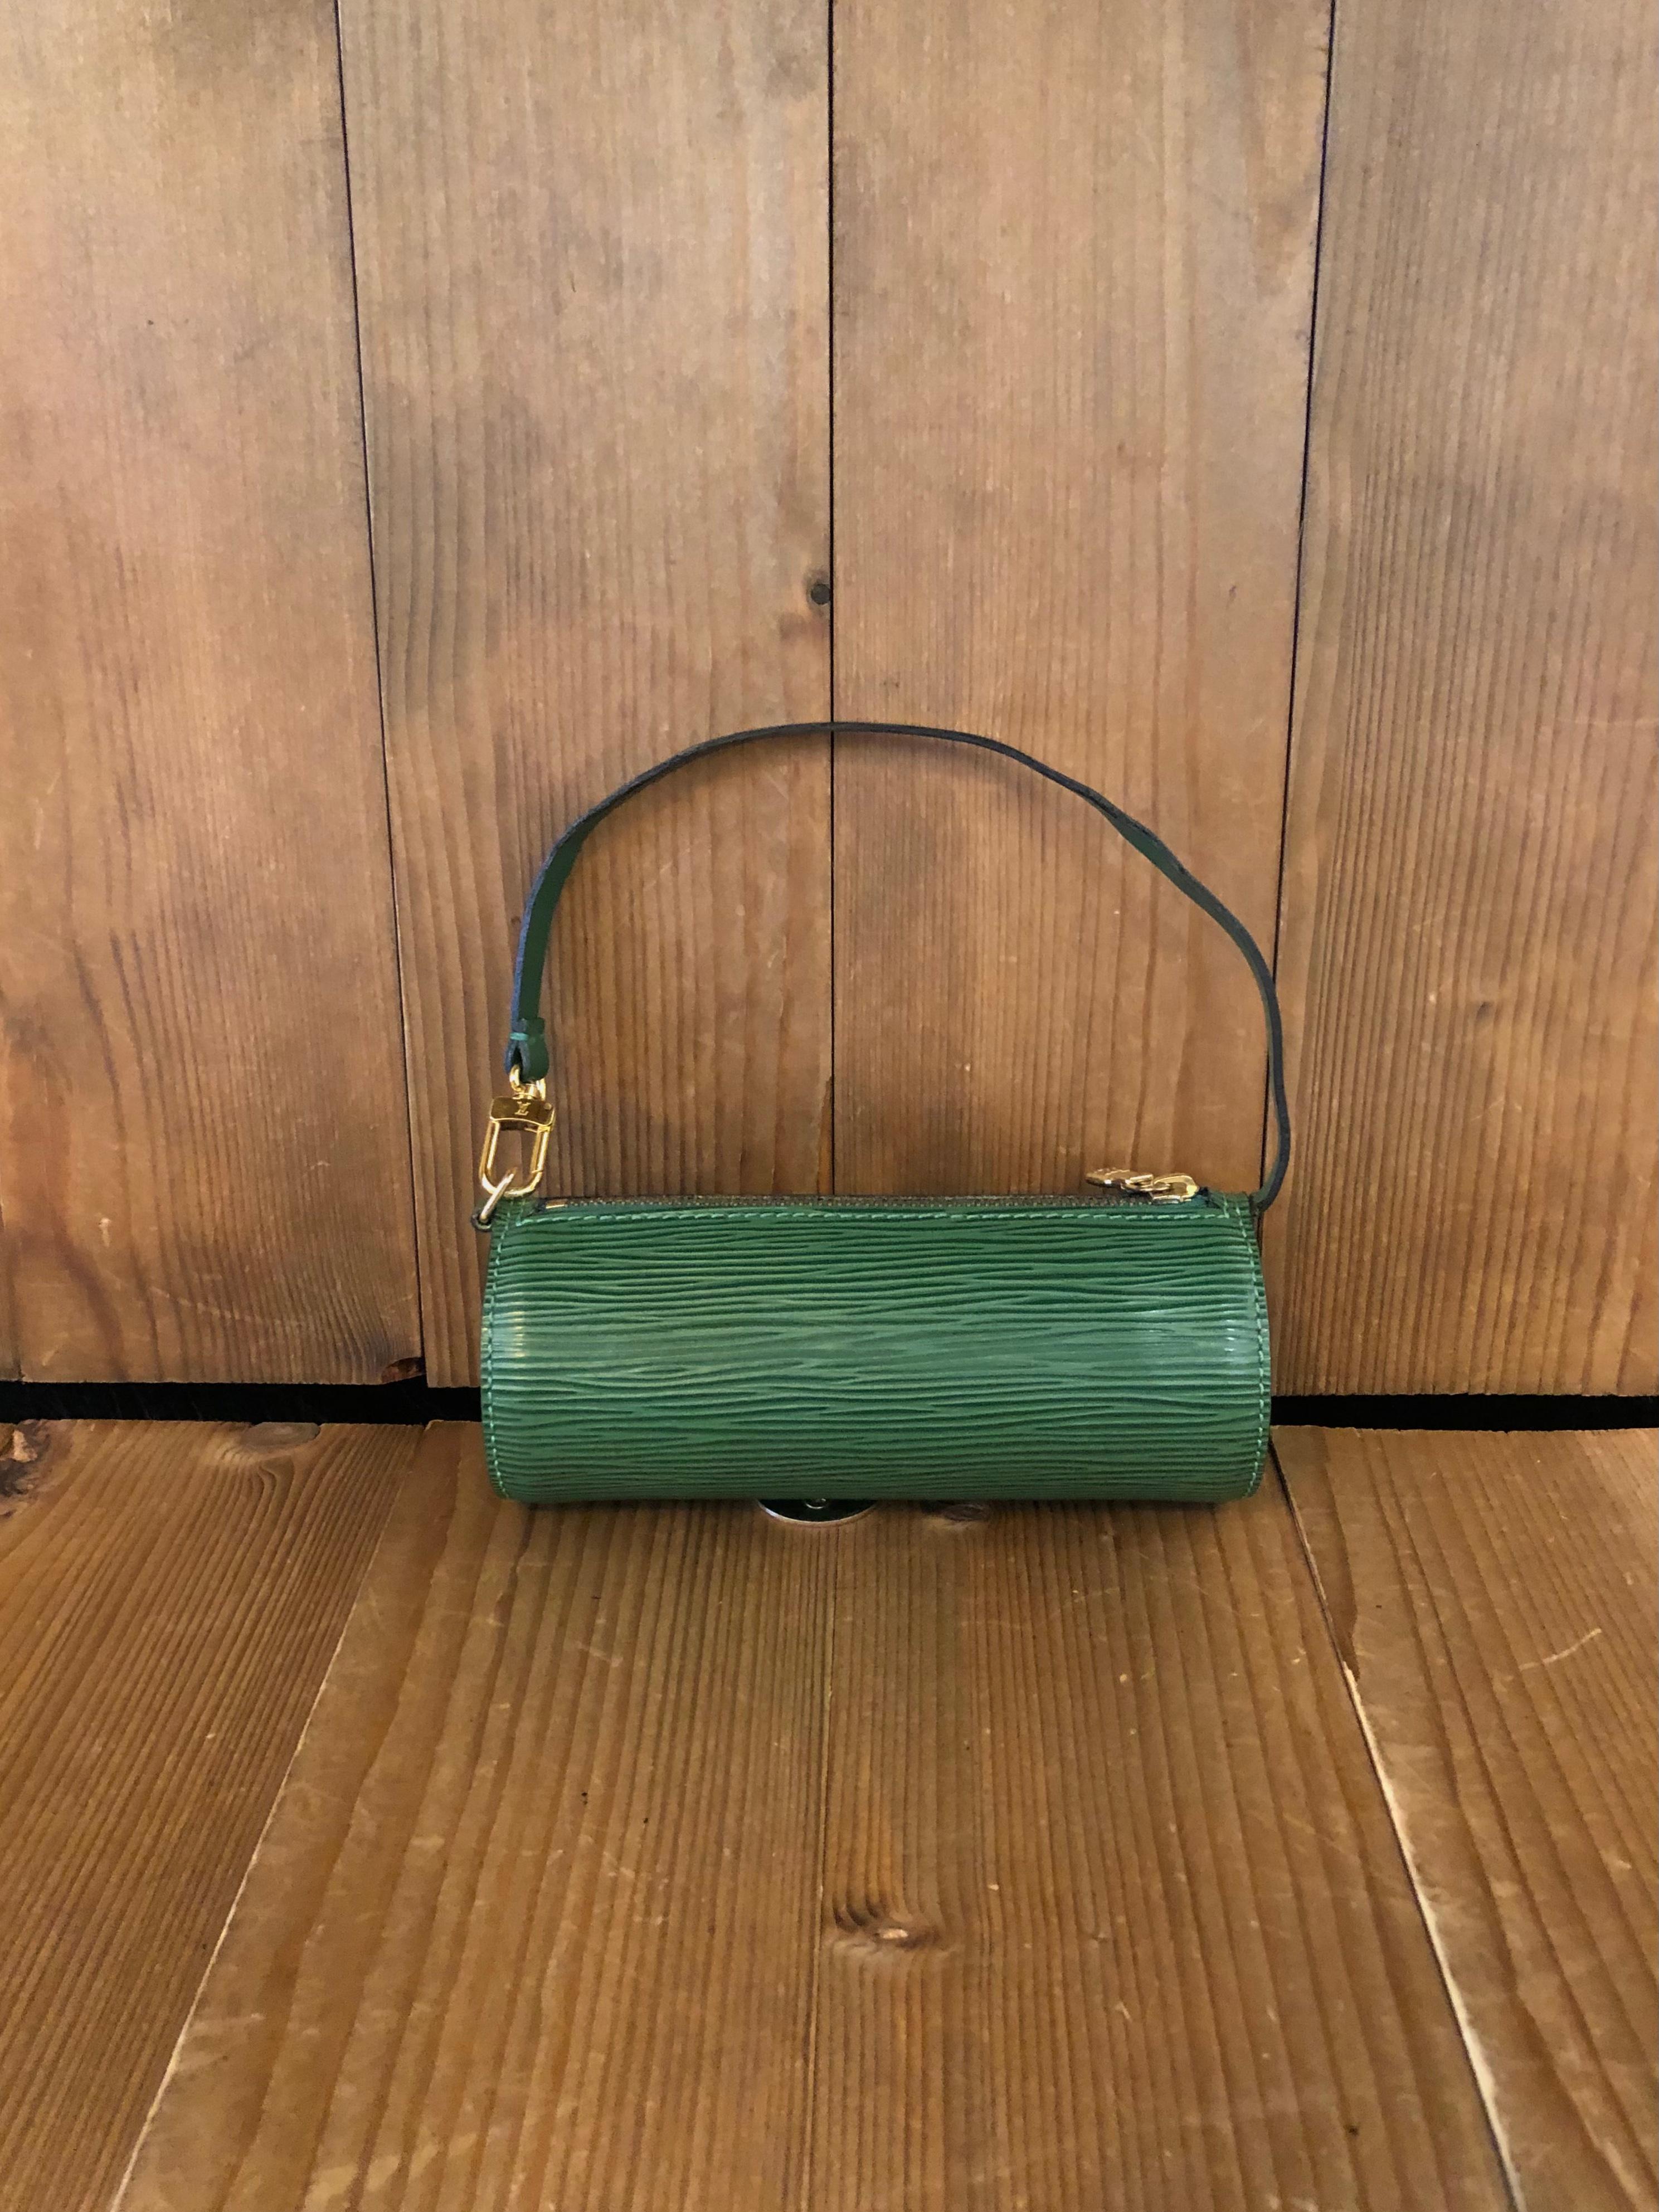 1990s LOUIS VUITTON mini Papillon pouch in green Epi leather. It originally came with the mother papillon. Made in France. Measures 6.25”x 2.25”x 2.25”. Comes with dust bag and complimentary non-LV chain.

Condition - Minor signs of wear. Generally